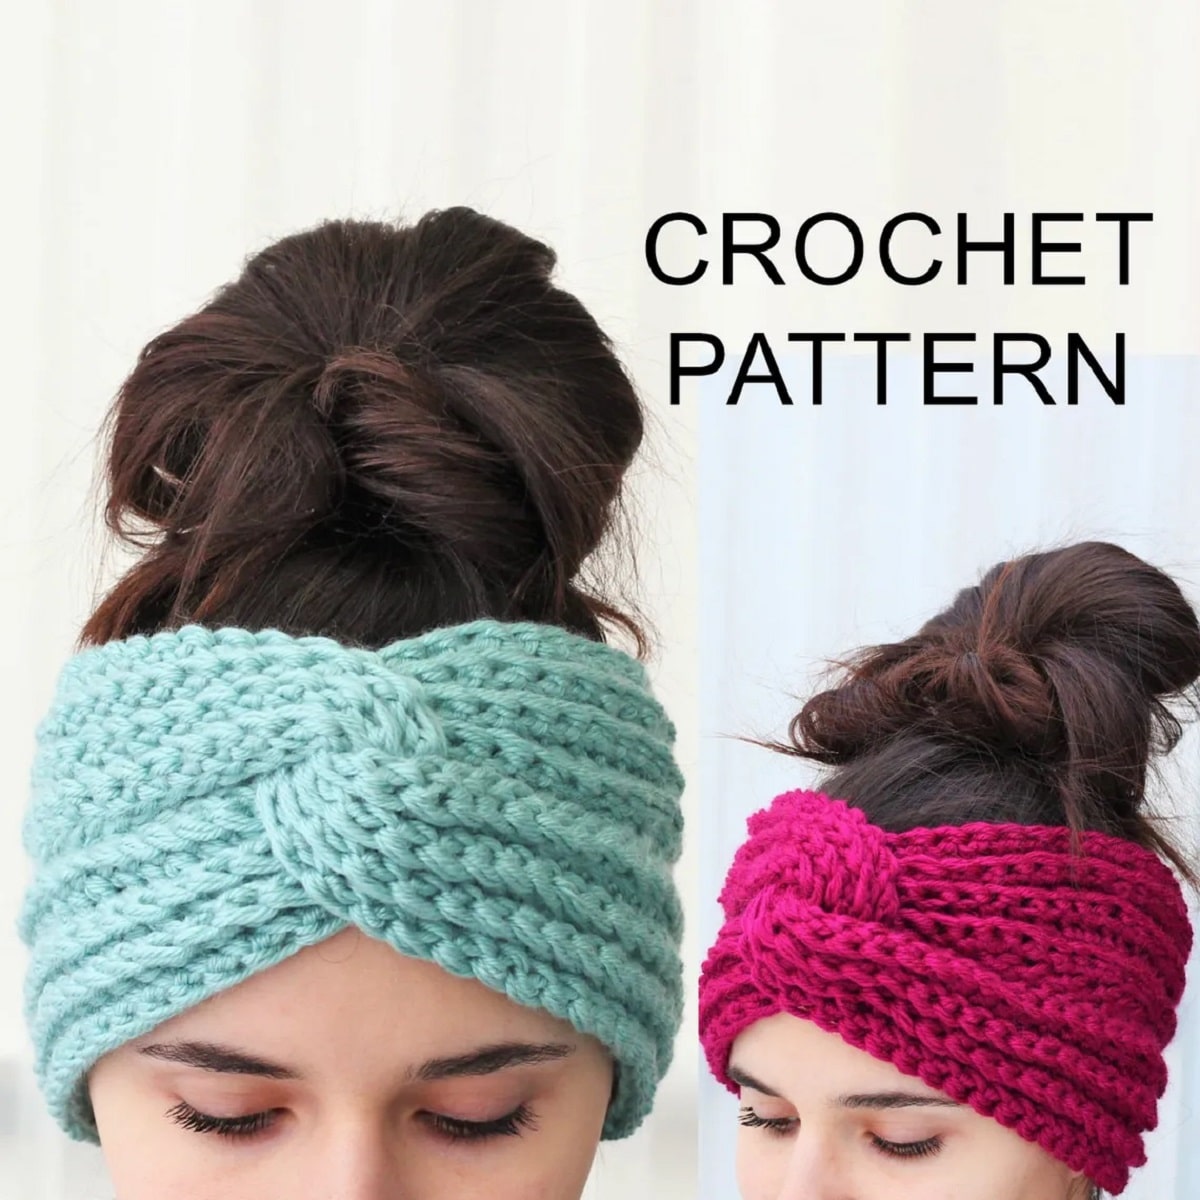 A brunette girl wearing a blue crochet headband with a twist design in the front and a dark pink headband in the same design.